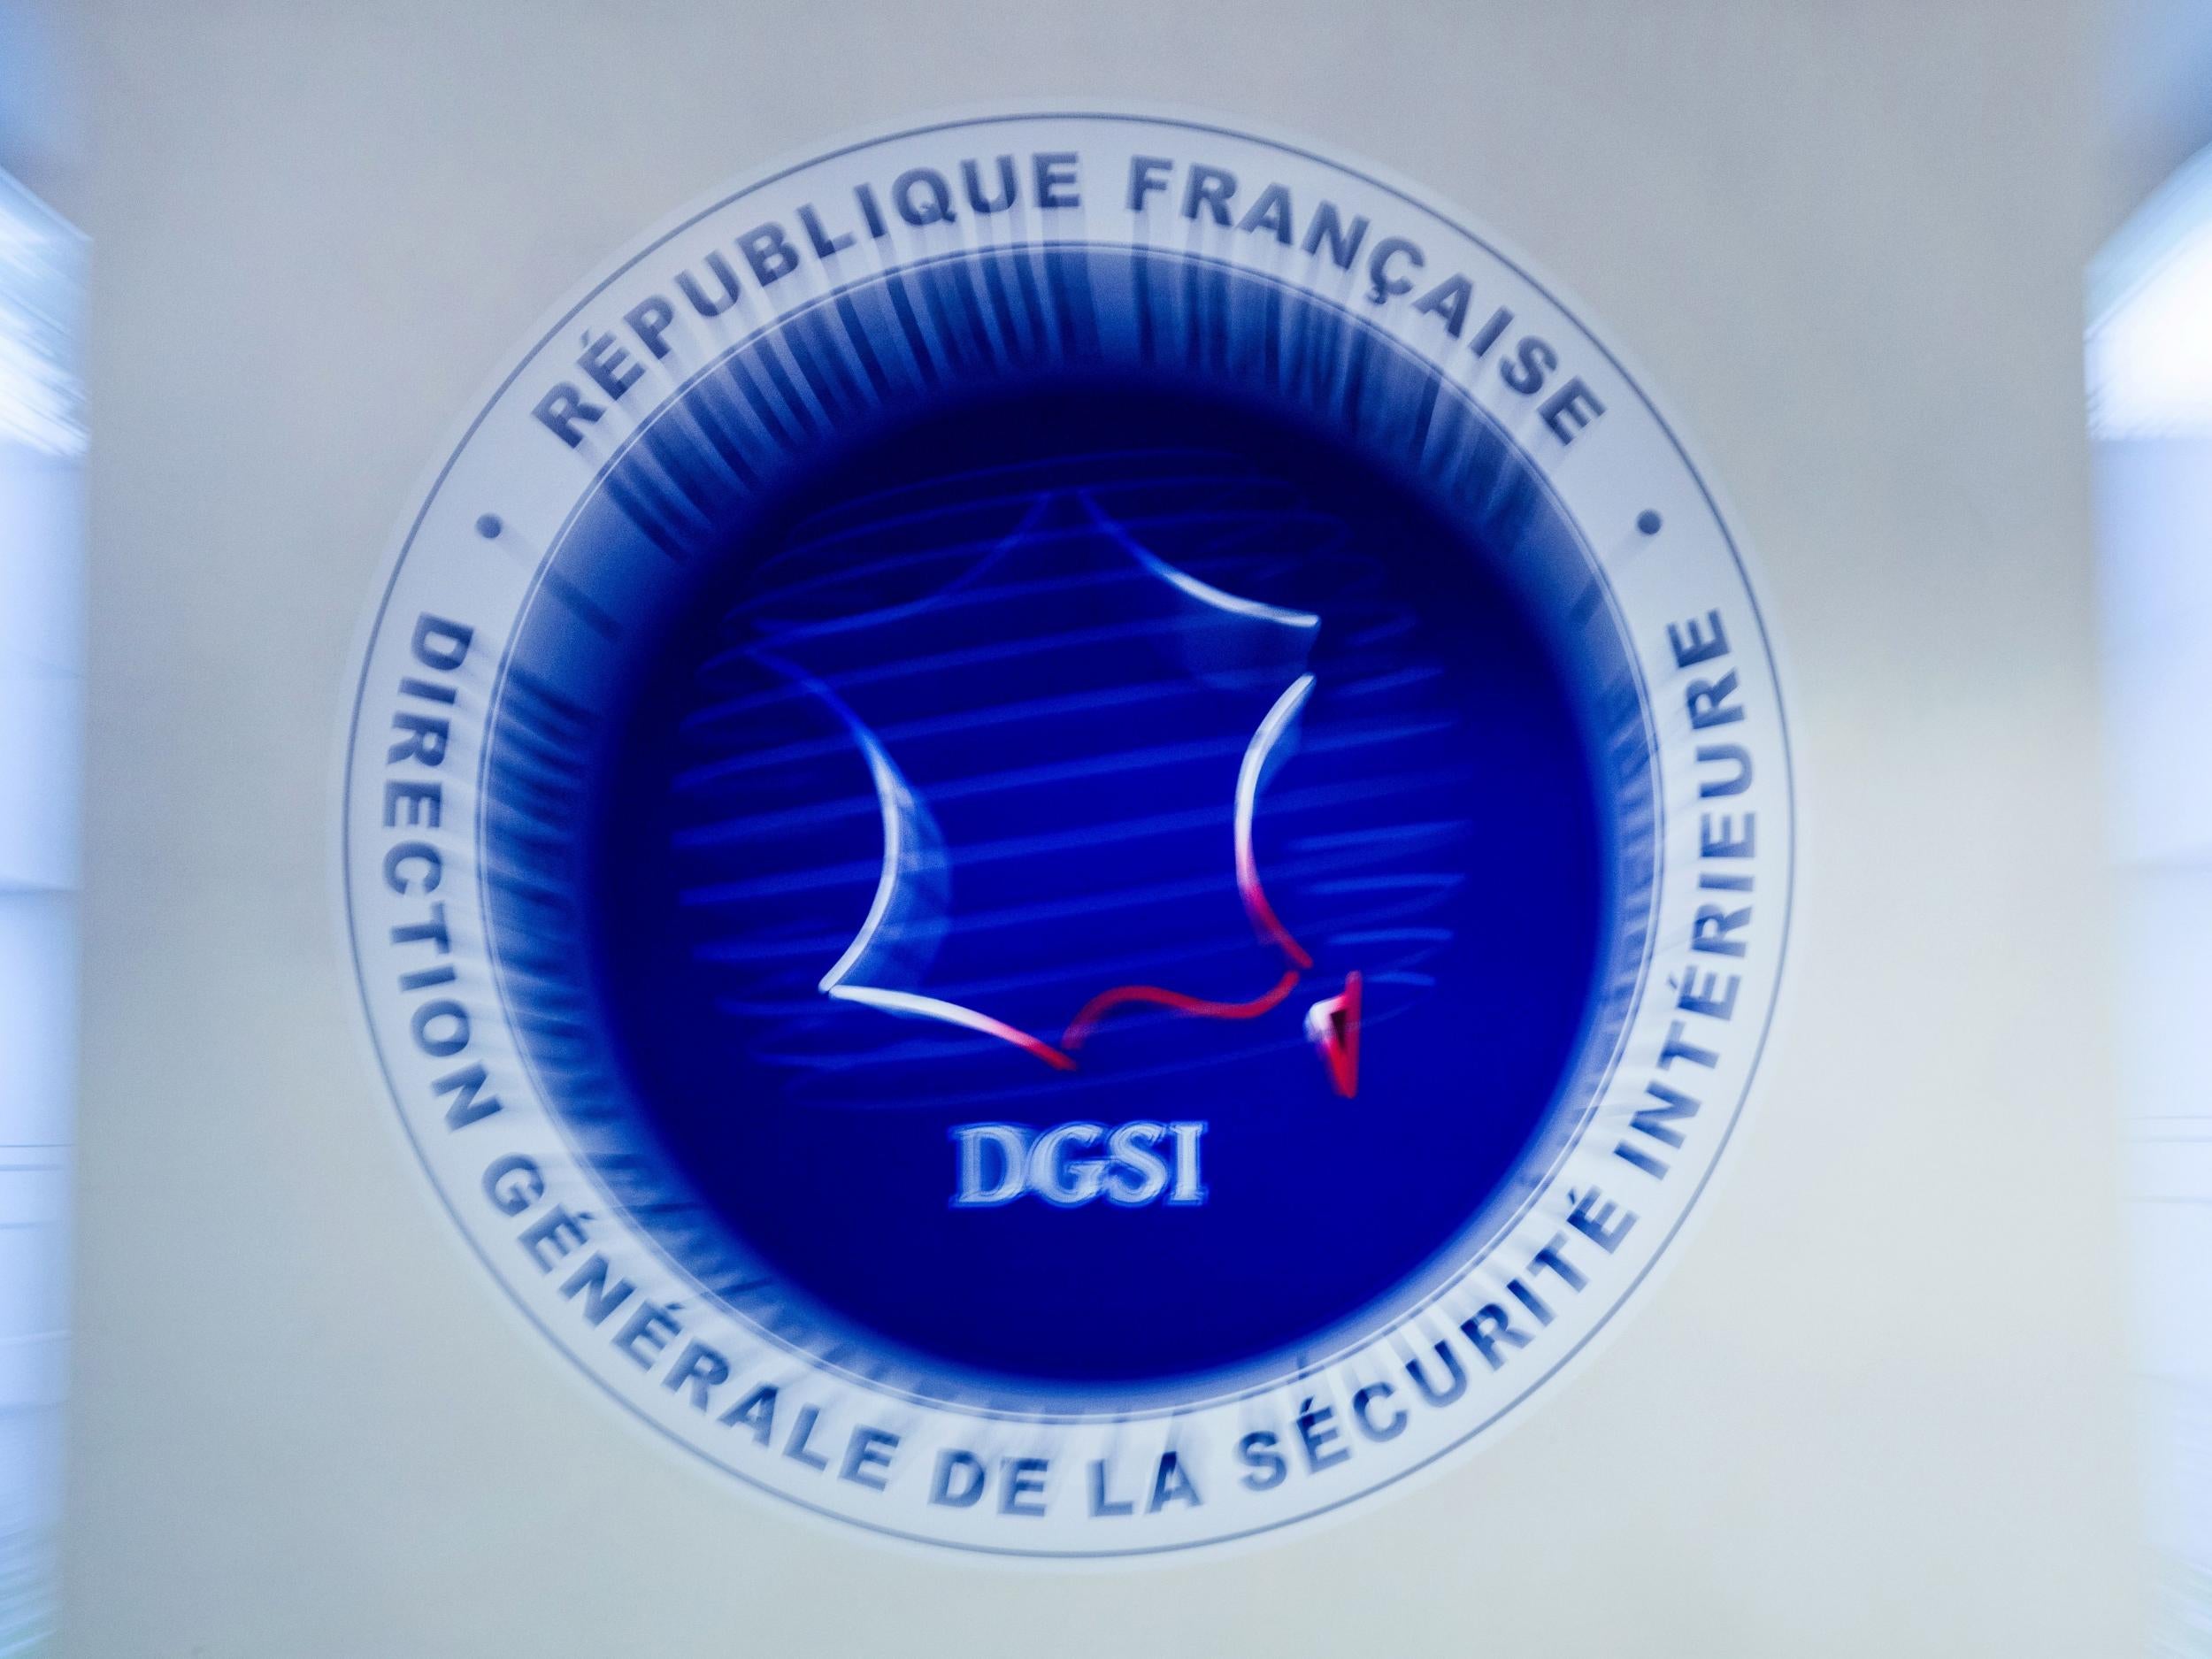 Man arrested after inadvertently climbing into France's spy headquarters